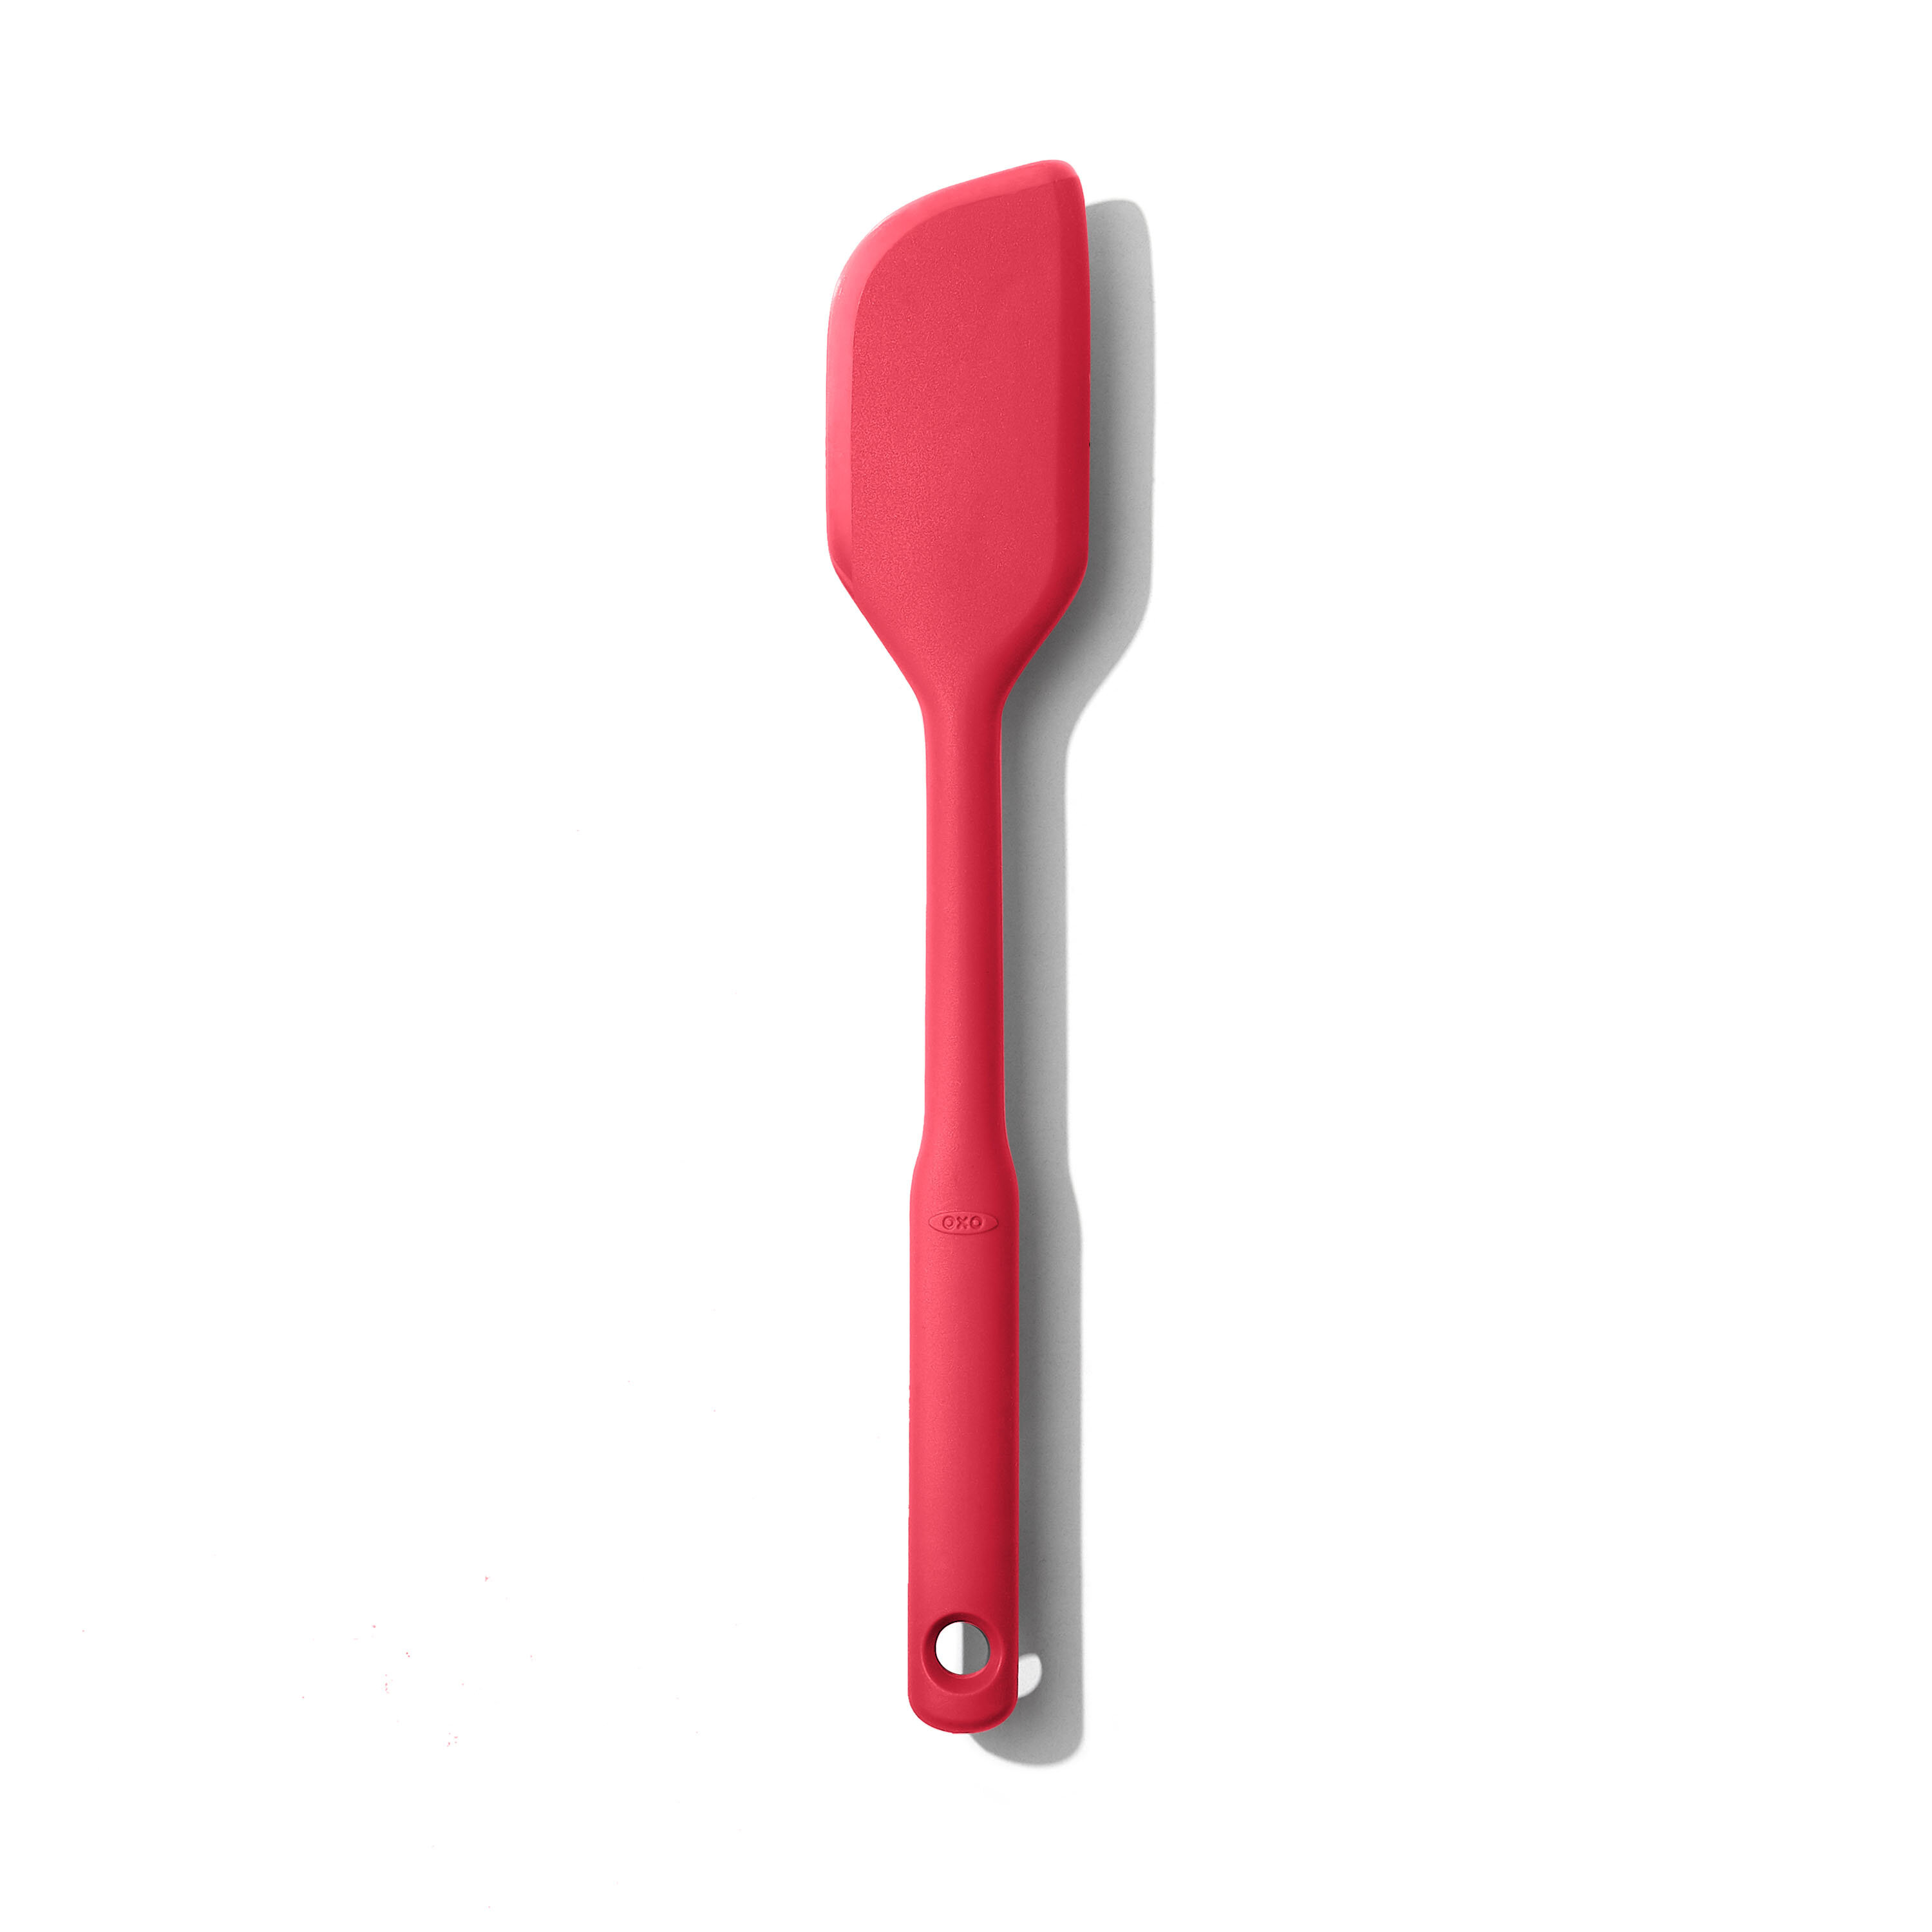 OXO Good Grips Silicone Slotted Spoon, us:one size, Peppercorn